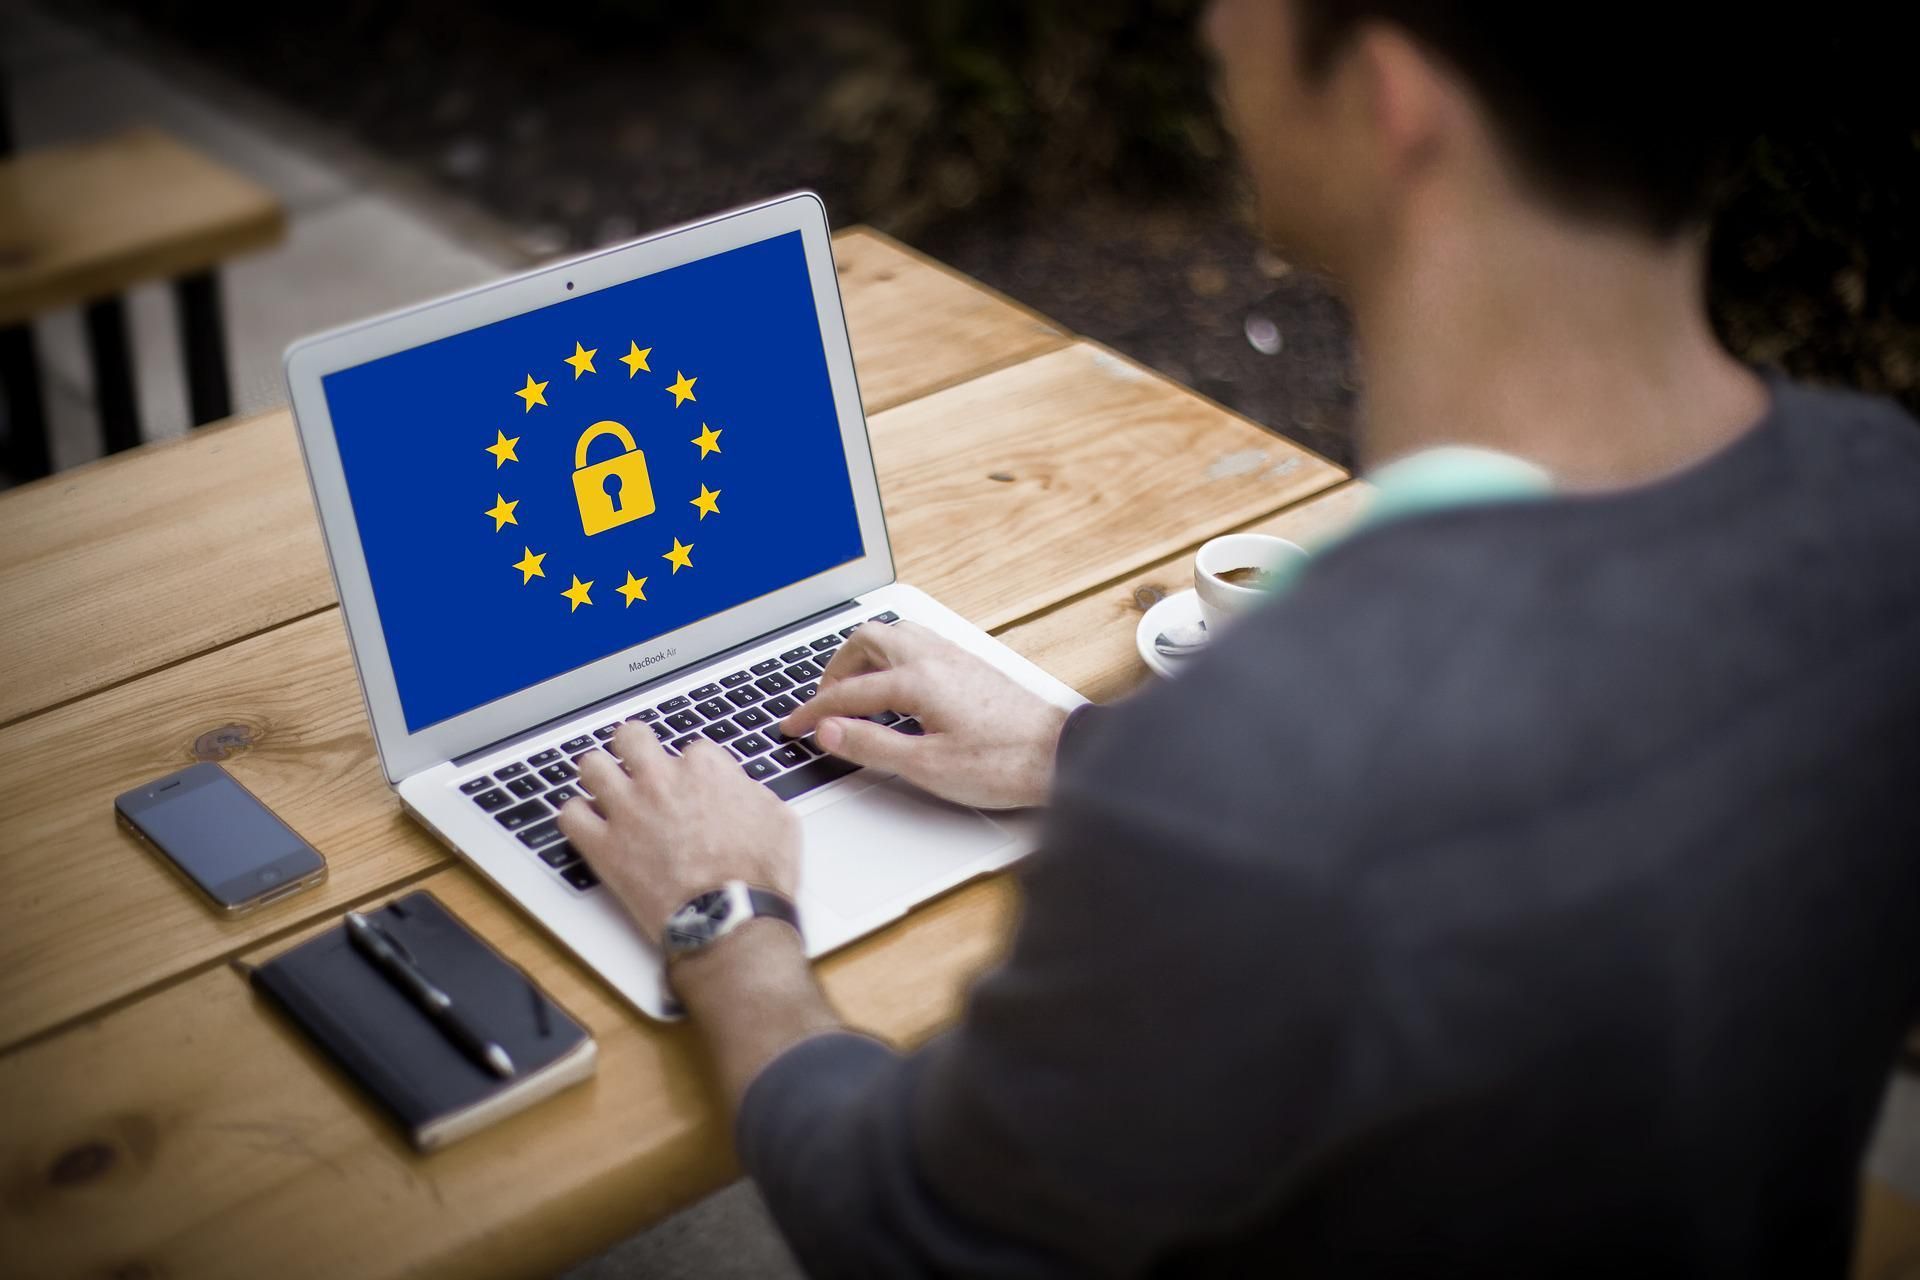 The General Data Protection Regulation (in English GDPR is the acronym General Data Protection Regulation), officially Regulation (EU) number 2016/679, is a regulation of the European Union regarding the processing of personal data and privacy, adopted on 27 April 2016